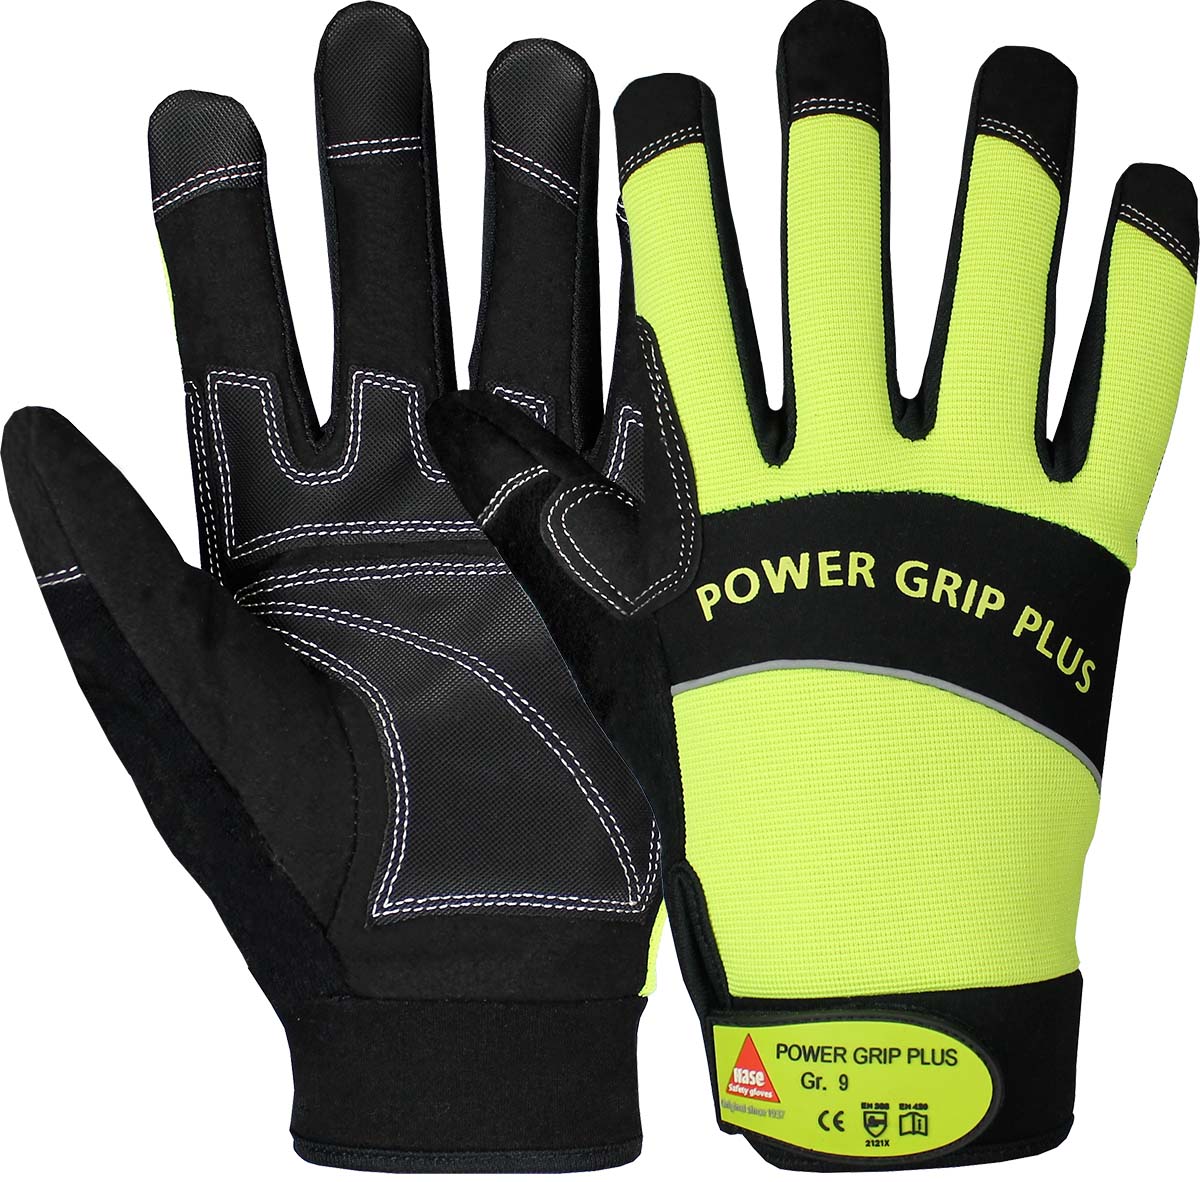 HASE Montagehandschuh "Power Grip Plus" Nr. 40200M, VPE: 10 PA